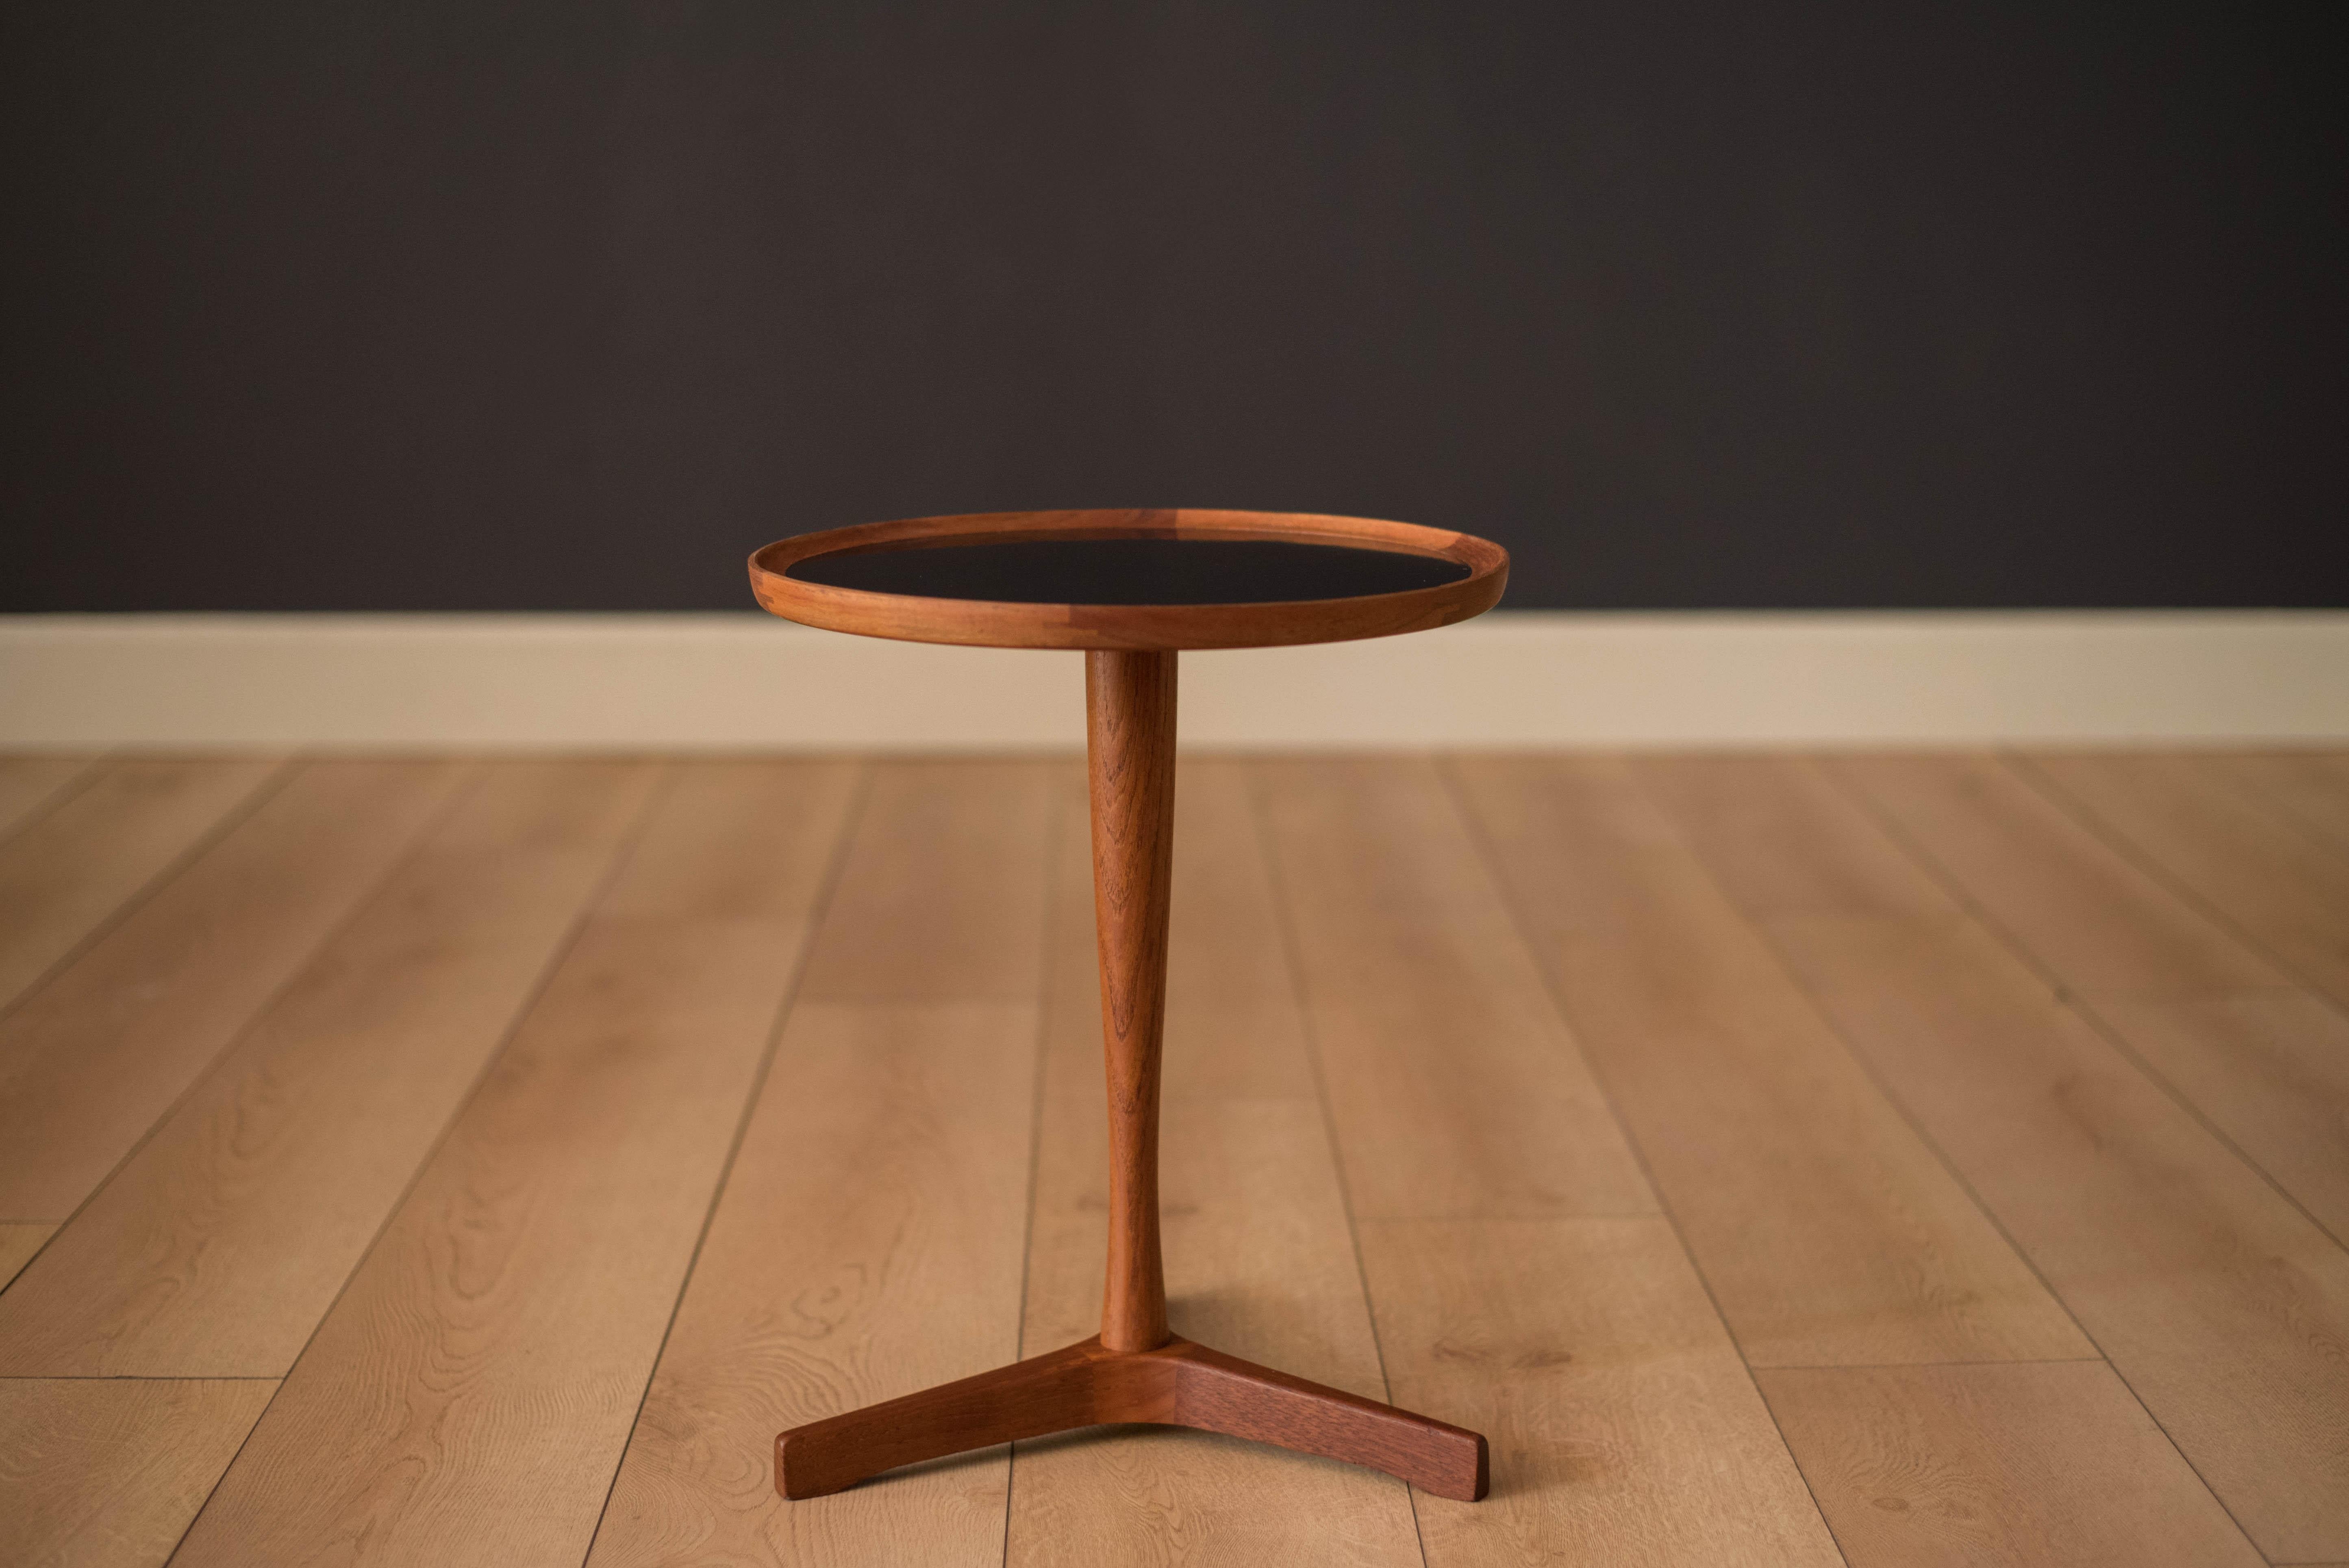 Mid-Century Modern side table designed by Hans C. Andersen, Denmark. This piece has a black laminate inlaid top and a solid teak pedestal base.
   